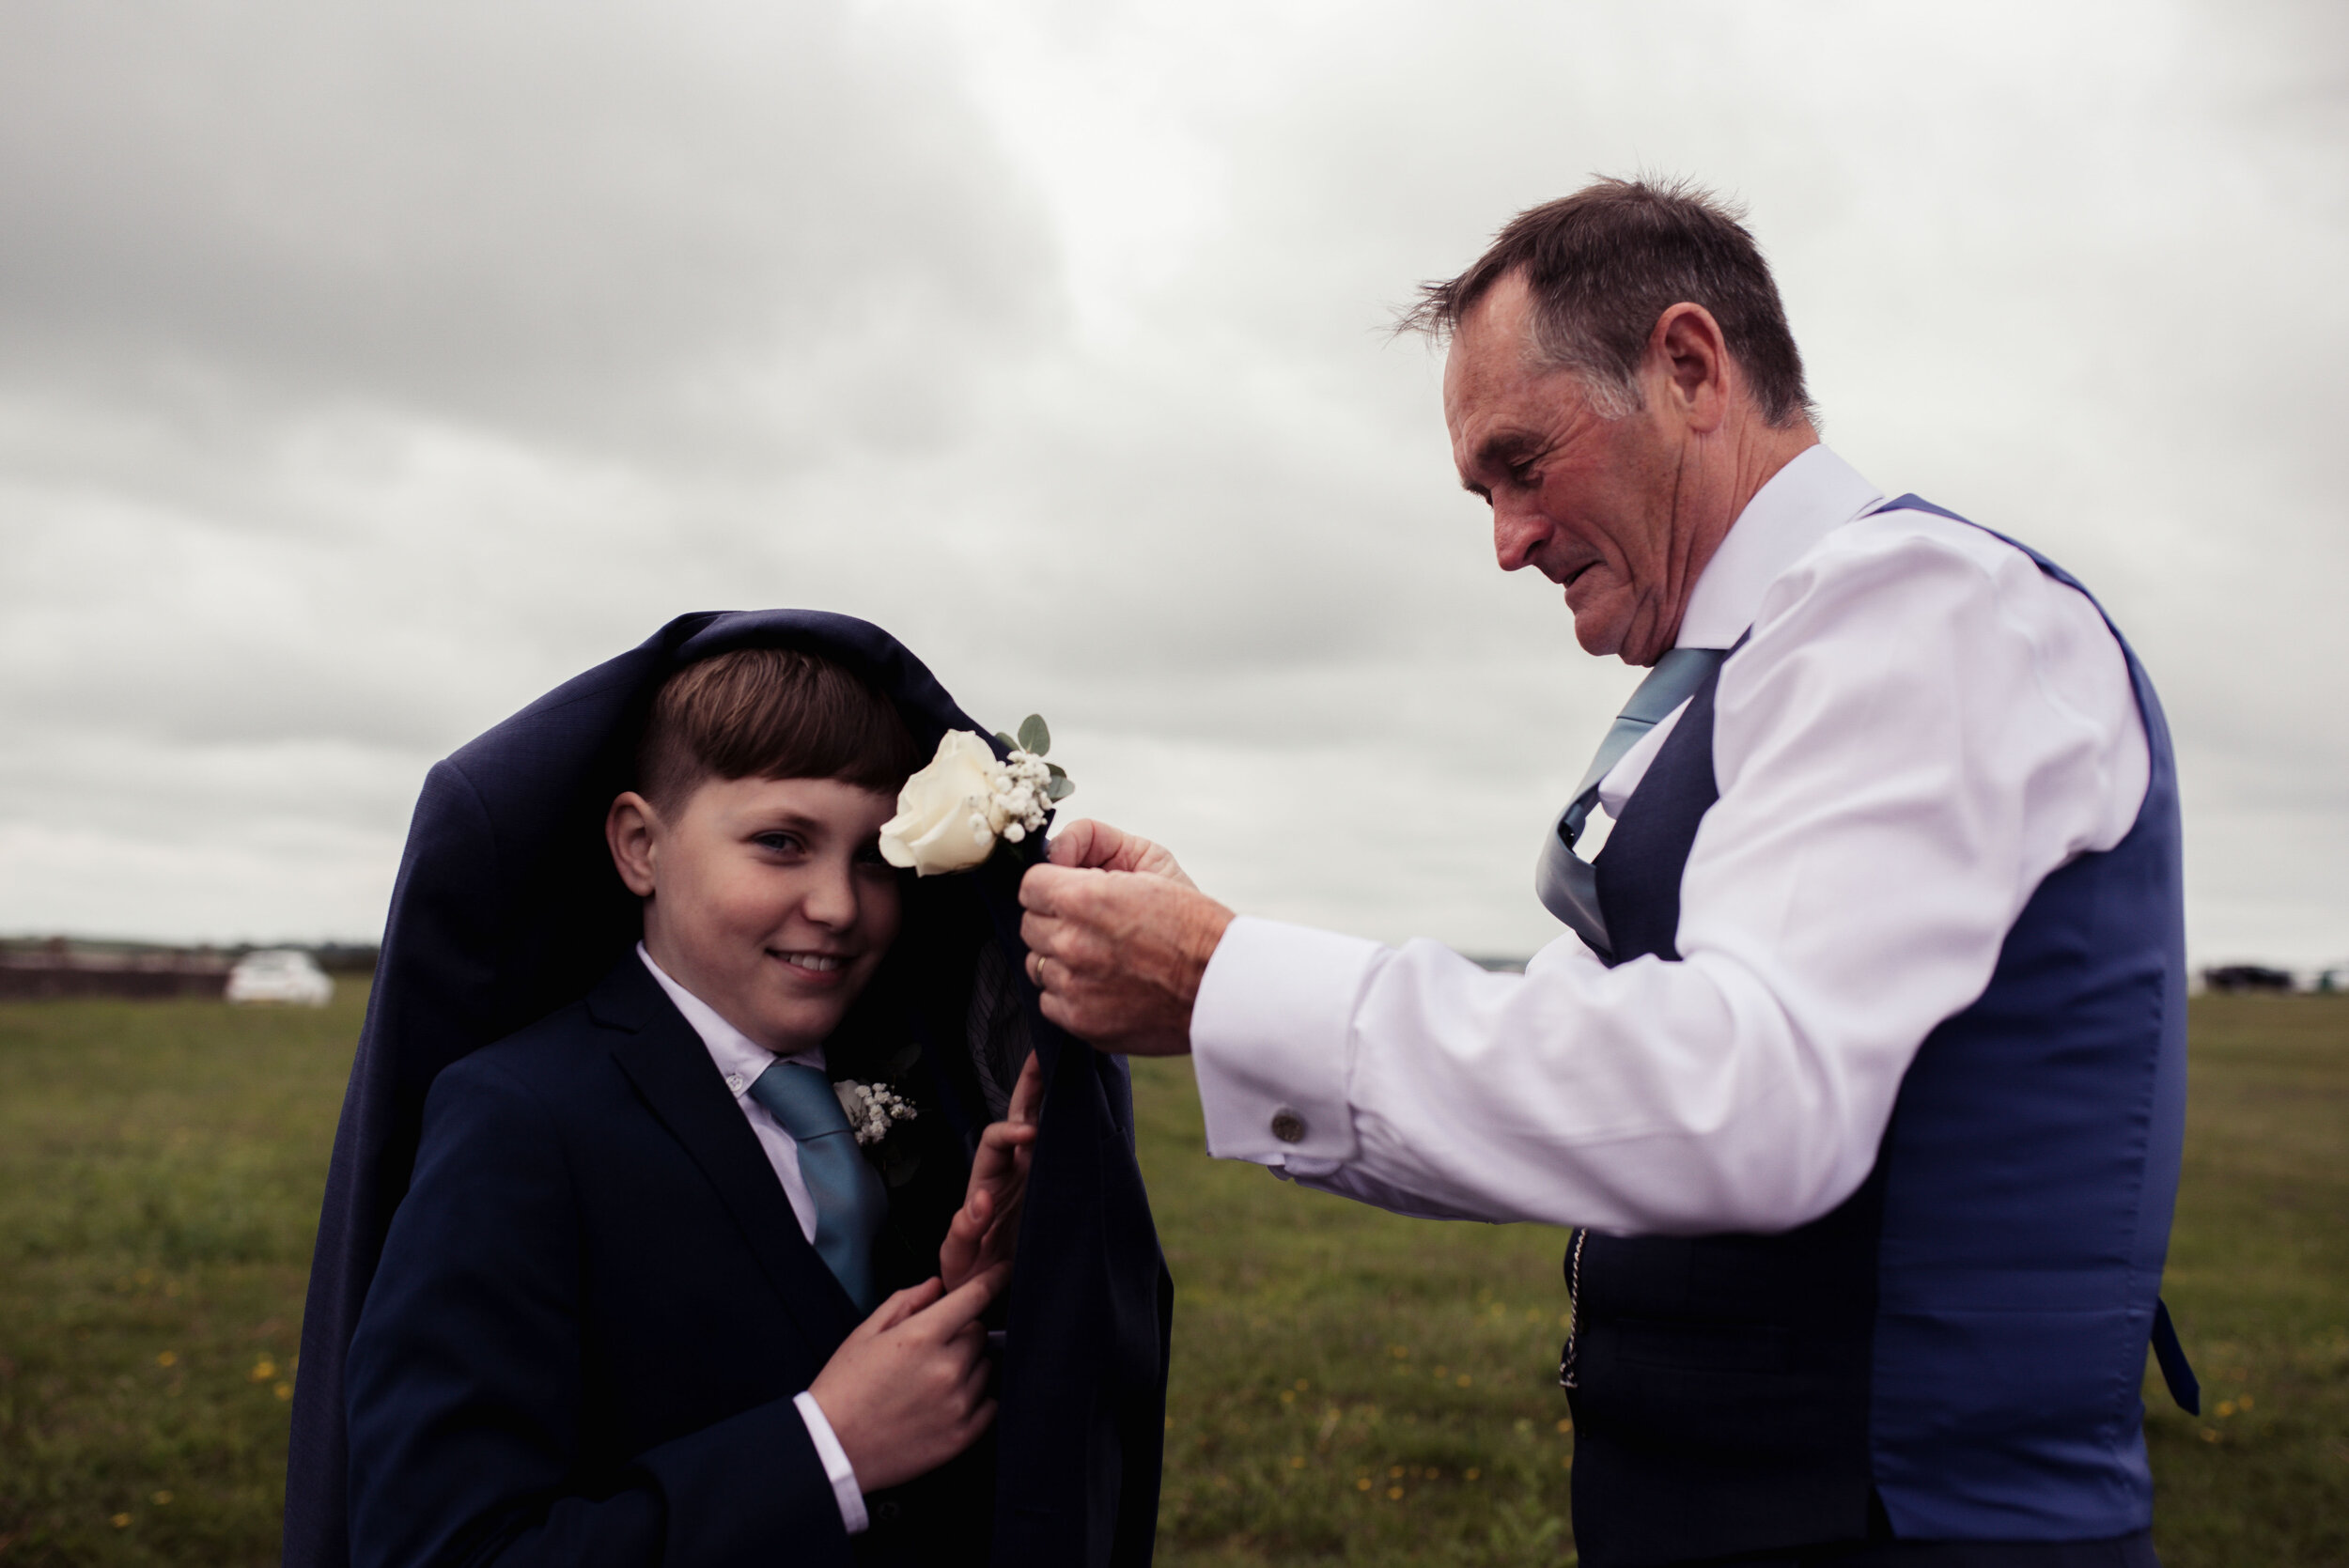 Best man helping put a button hole on the son of the groom